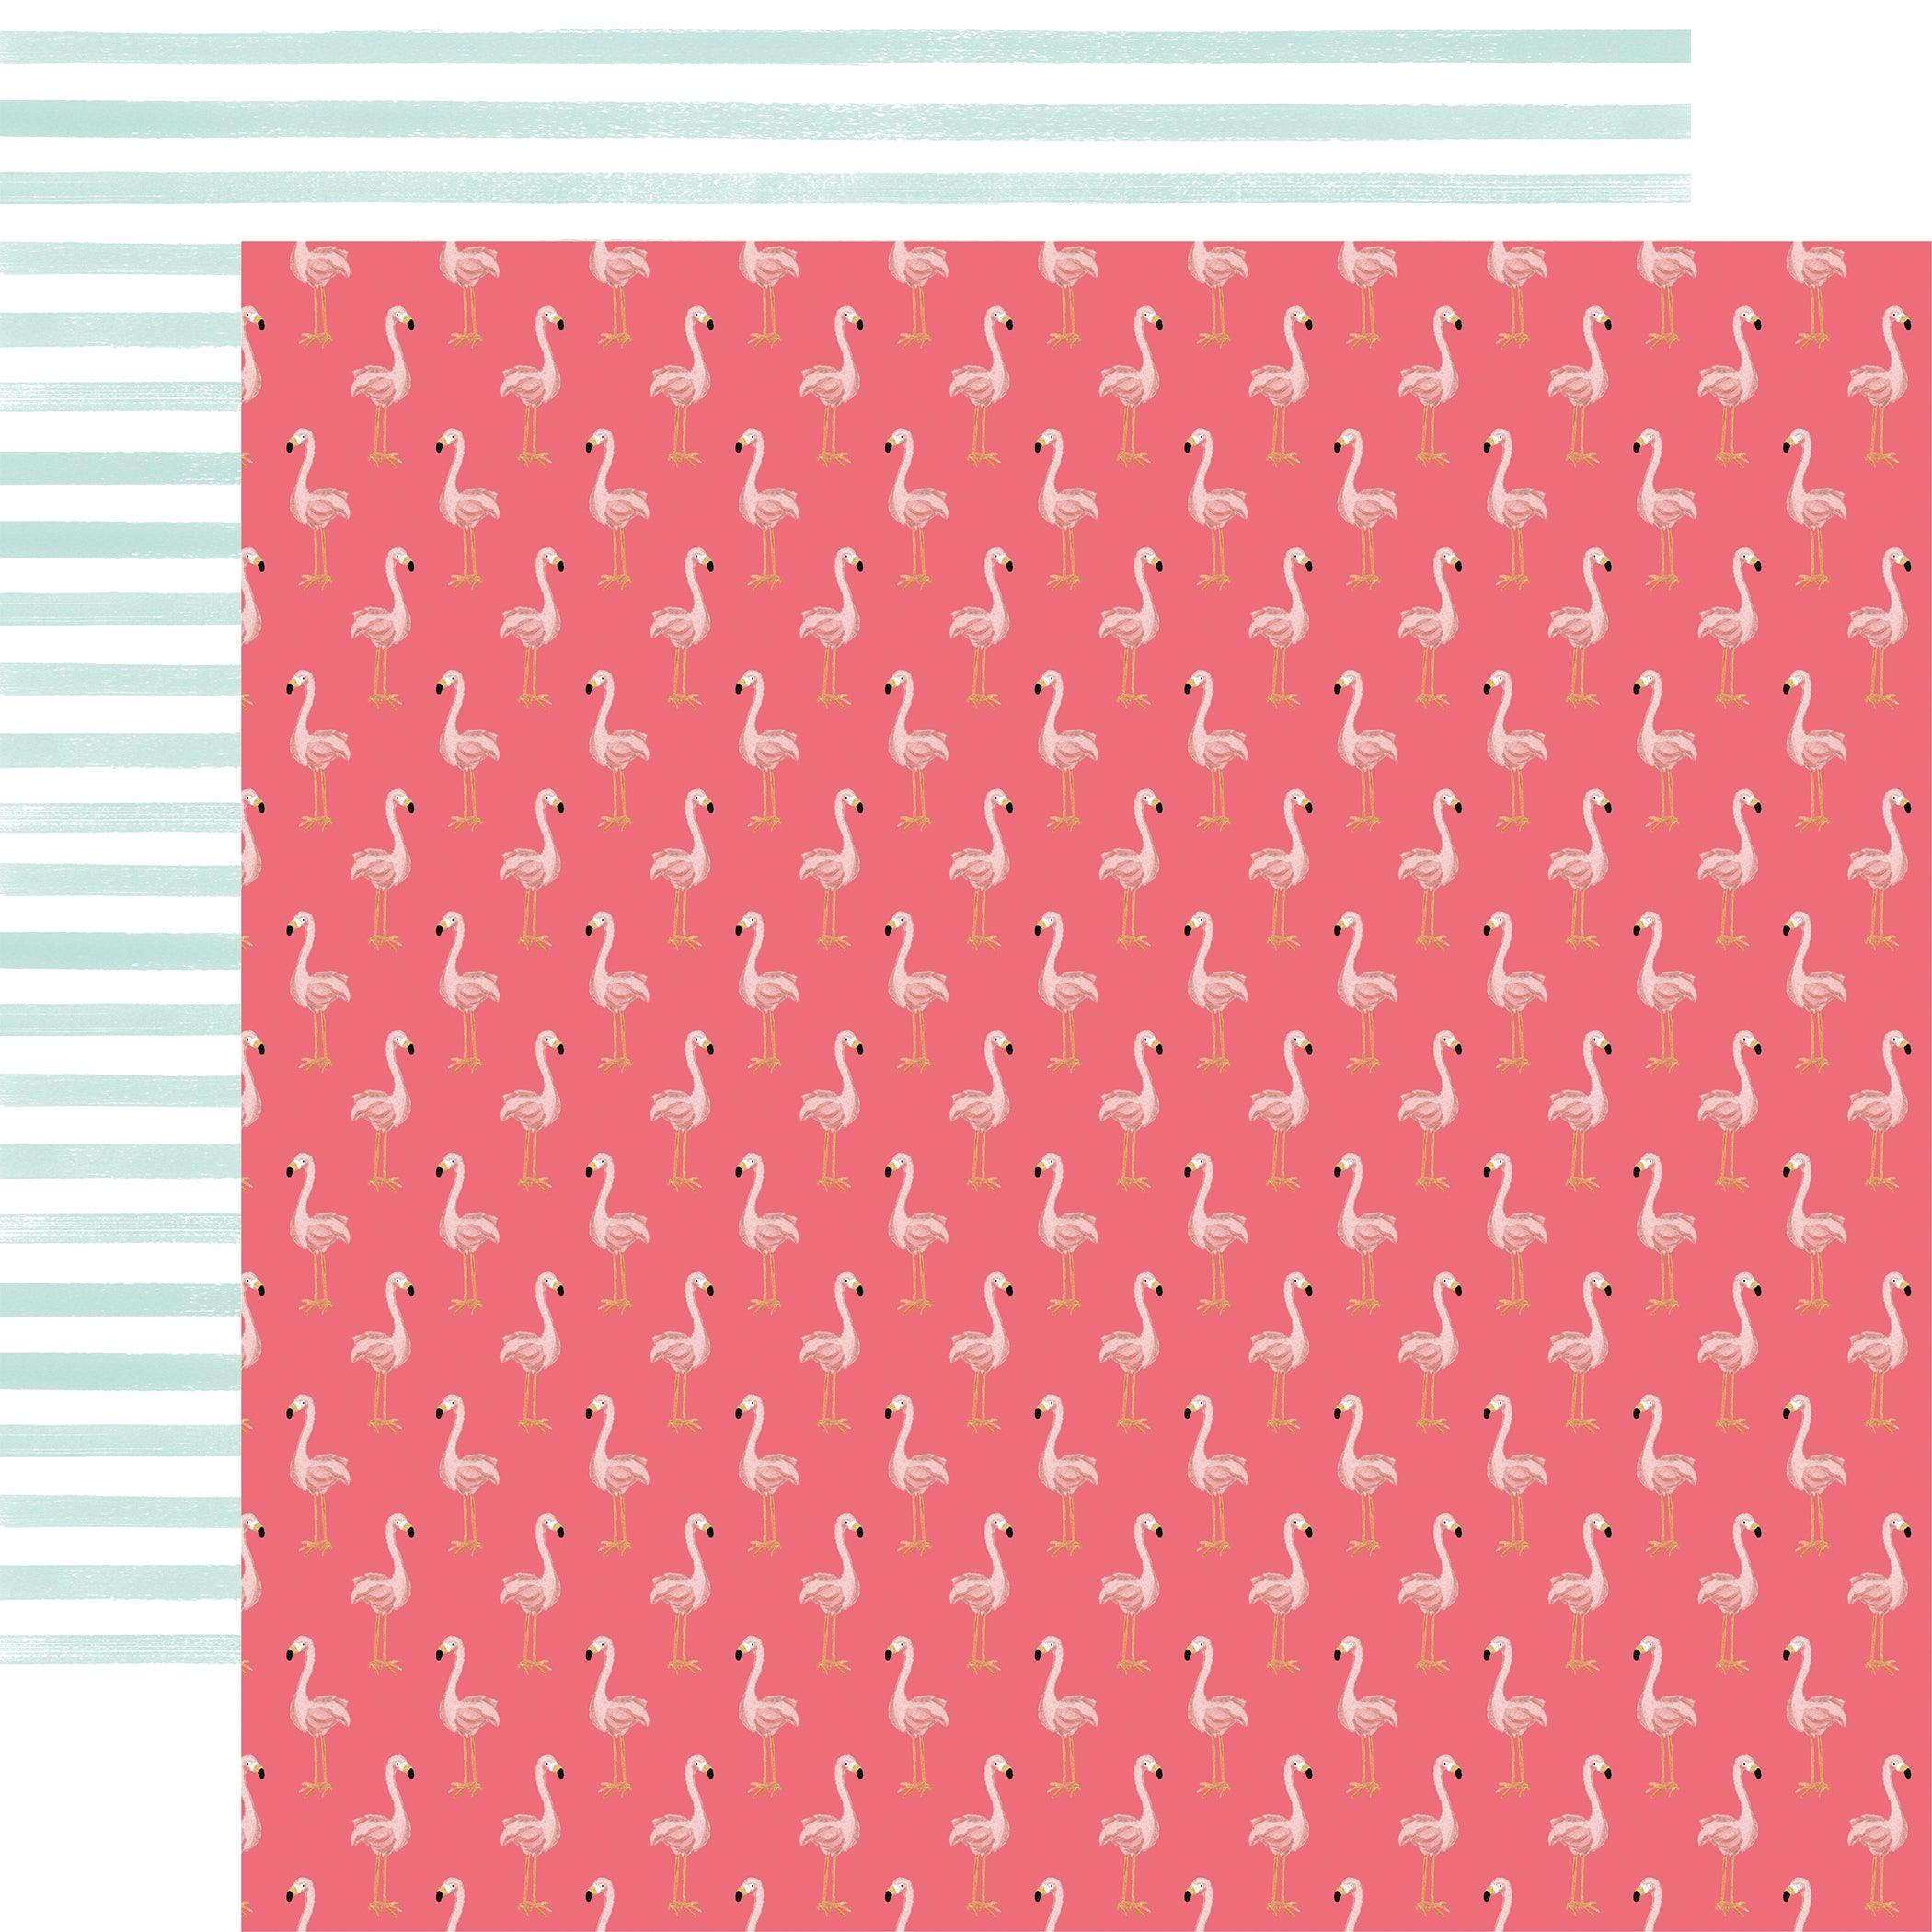 Animal Kingdom Collection Flock of Flamingos 12 x 12 Double-Sided Scrapbook Paper by Echo Park Paper - Scrapbook Supply Companies